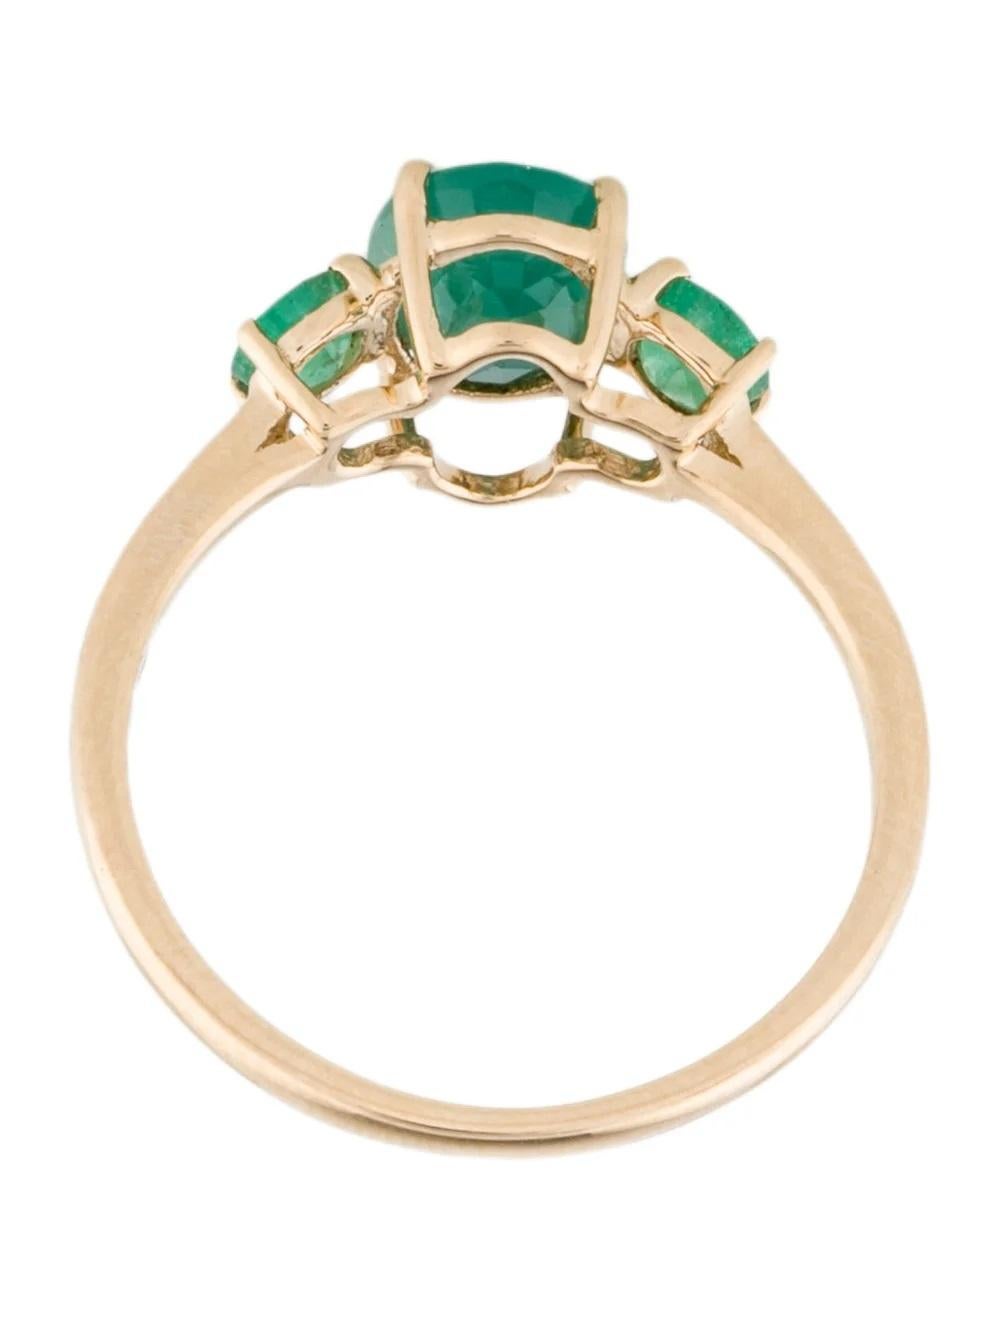 Women's 14K Emerald Cocktail Ring 1.18ctw Green Gemstone Yellow Gold Size 6.75 - Luxury For Sale